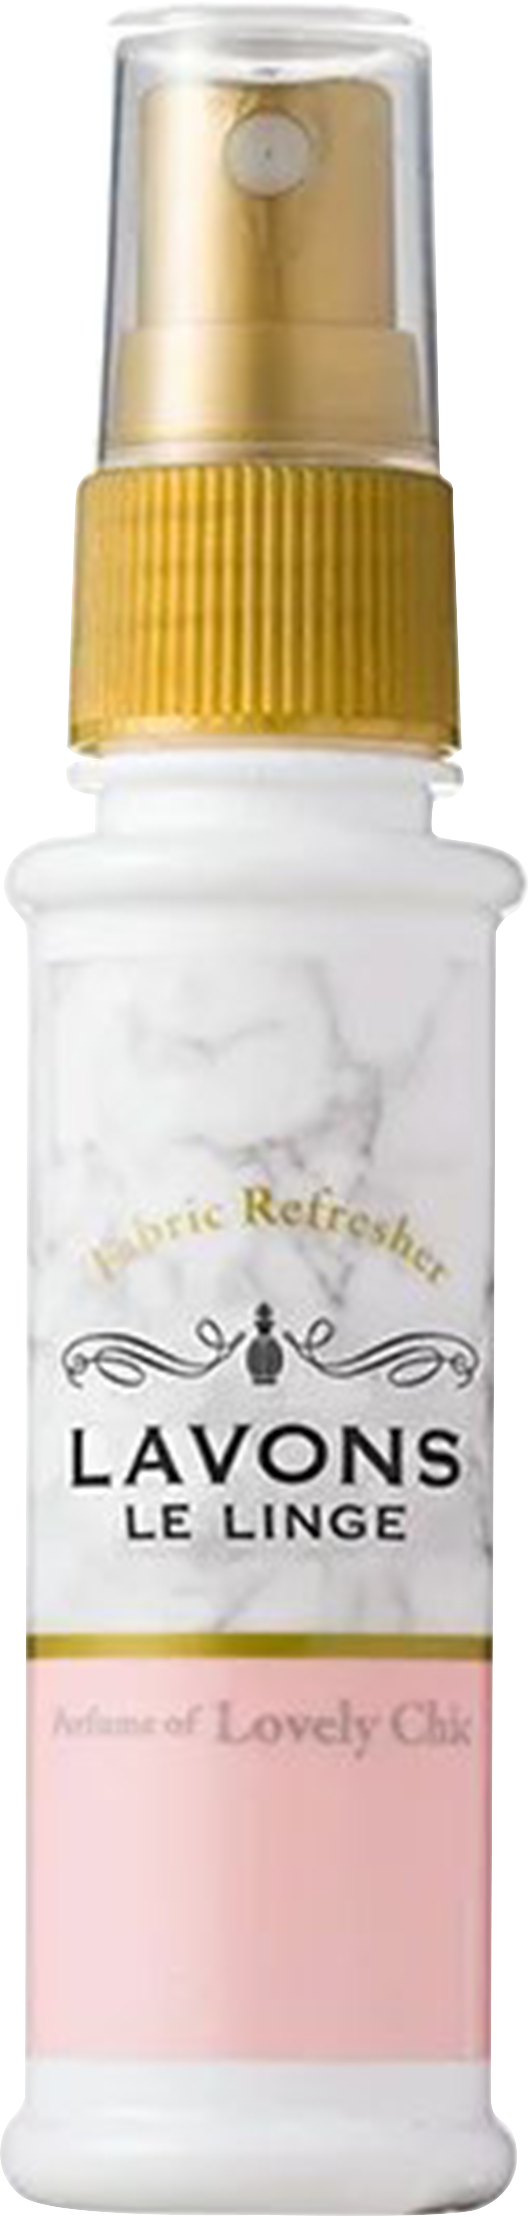 LAVONS - Fabric Refresher - Lovely Chic (40ml)